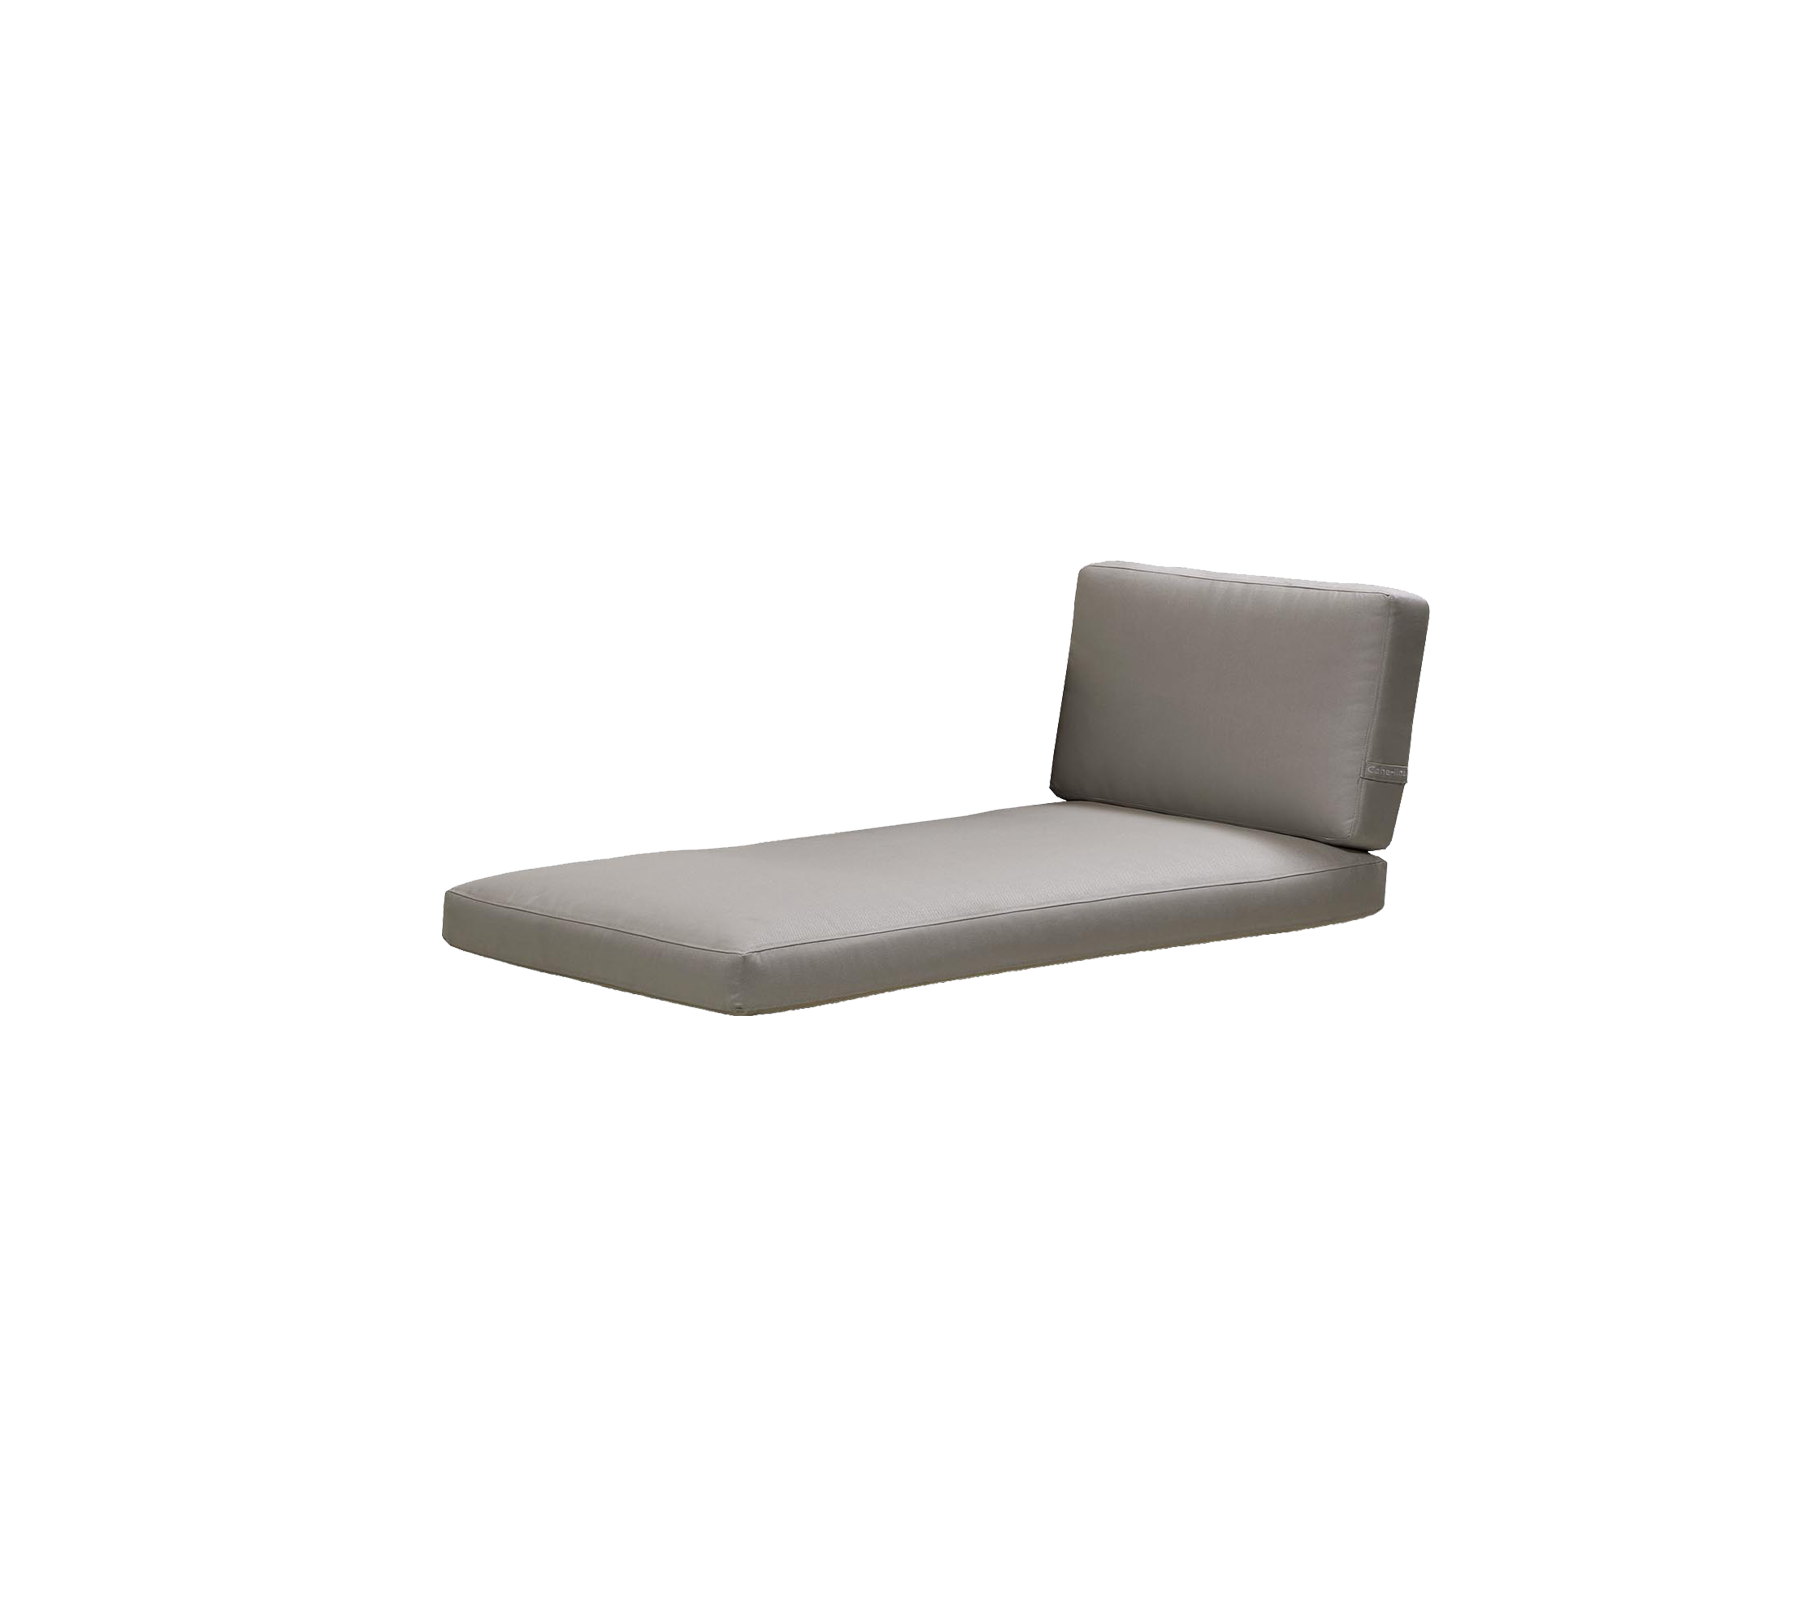 Connect chaise longue modulebank, kussenhoes, links